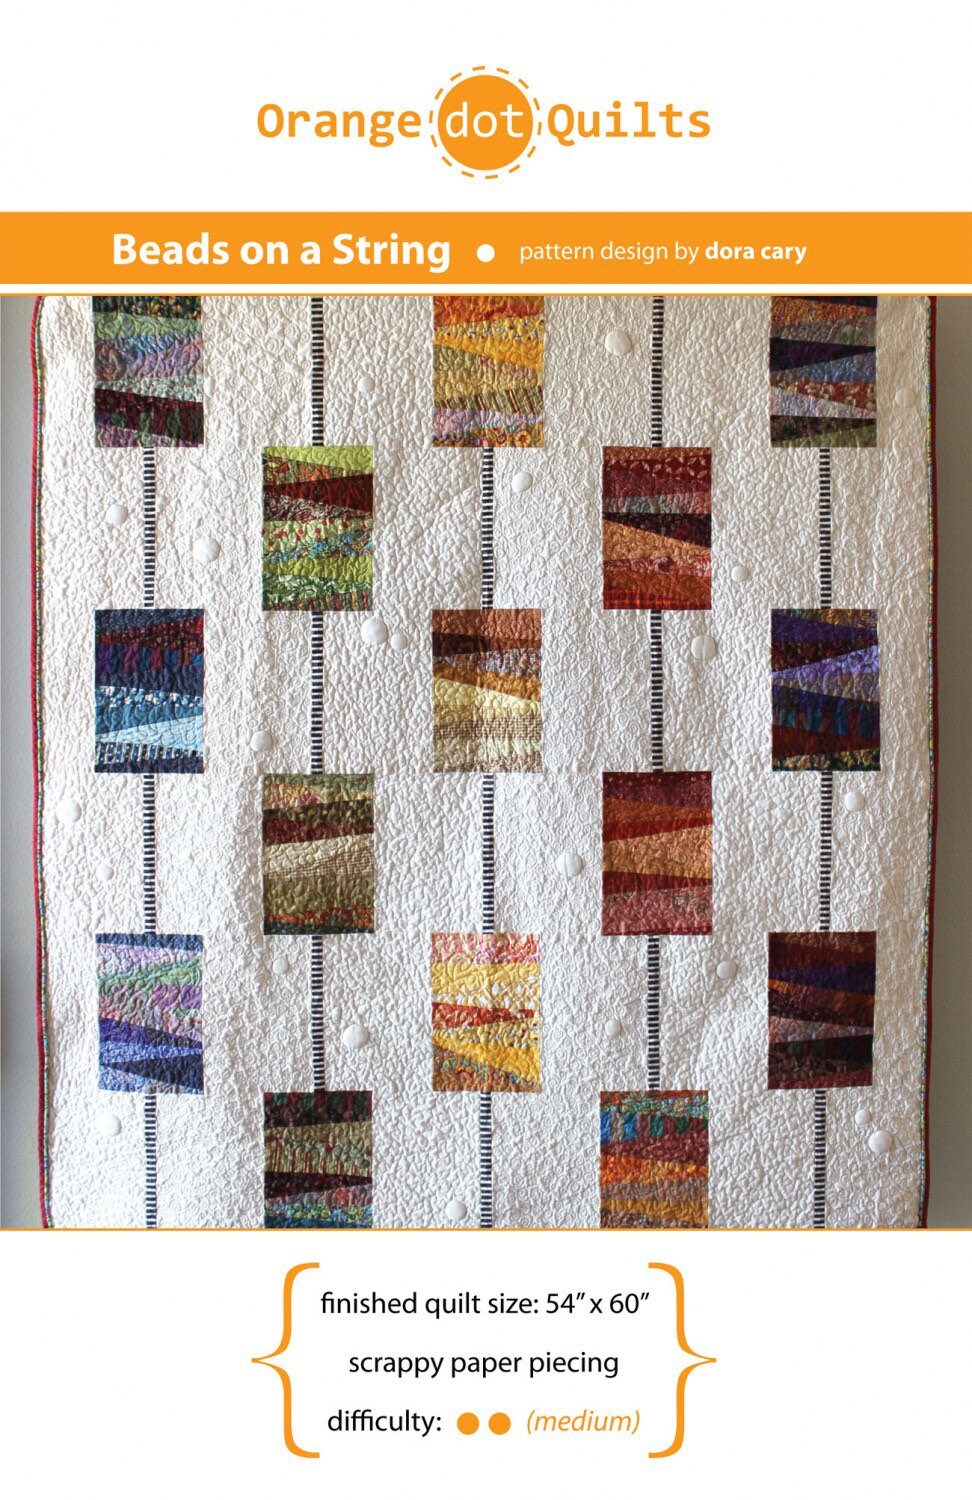 Beads on a String Quilt Pattern - Orange Dot Quilts - Dora Cary - Scrap Quilt Pattern